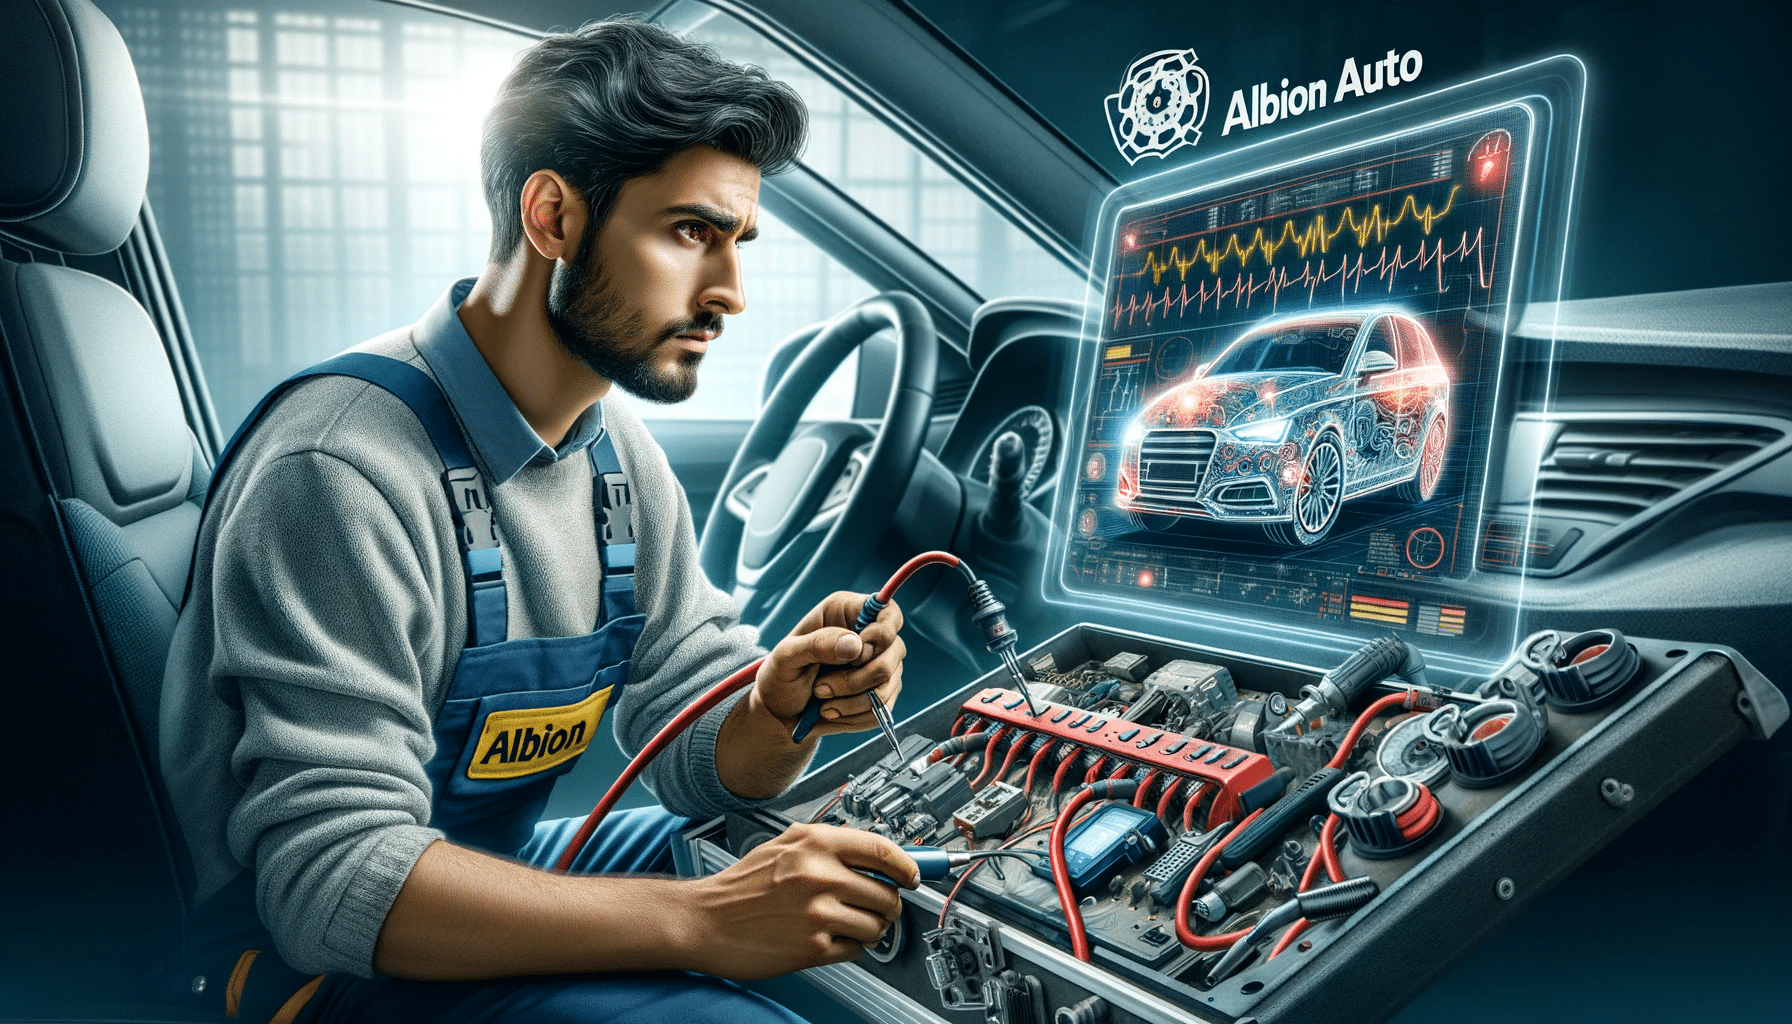 An-albion-auto-mechanic-of-south-asian-descent-using-advanced-diagnostic-tools-to-troubleshoot-a-cars-electrical-problem